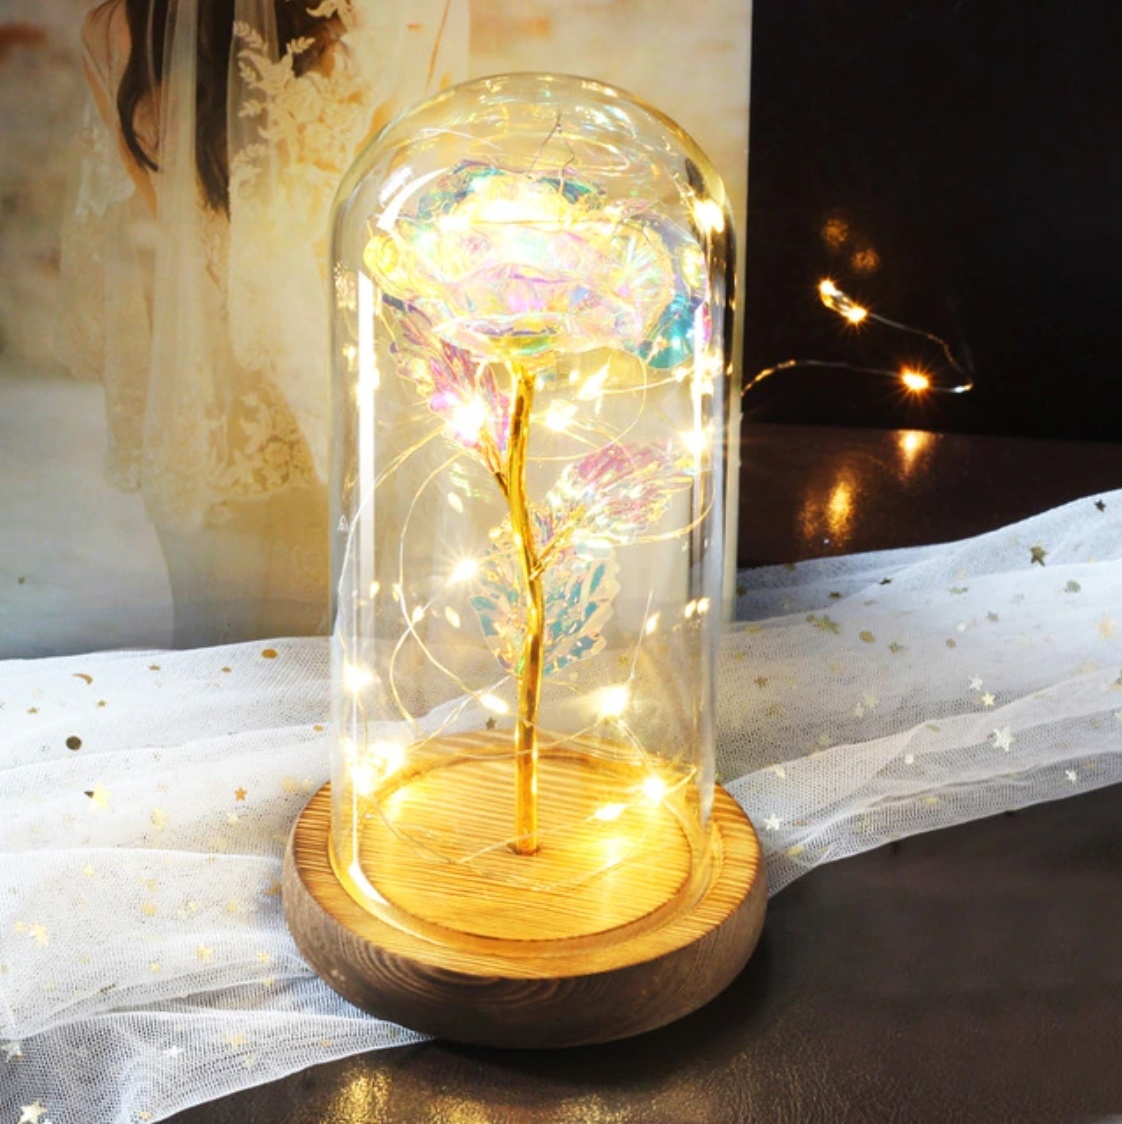 Art Rose in Glass Bell Jar with Lighting - Silk Roses Flowers Luxury Glass Decor Ornament